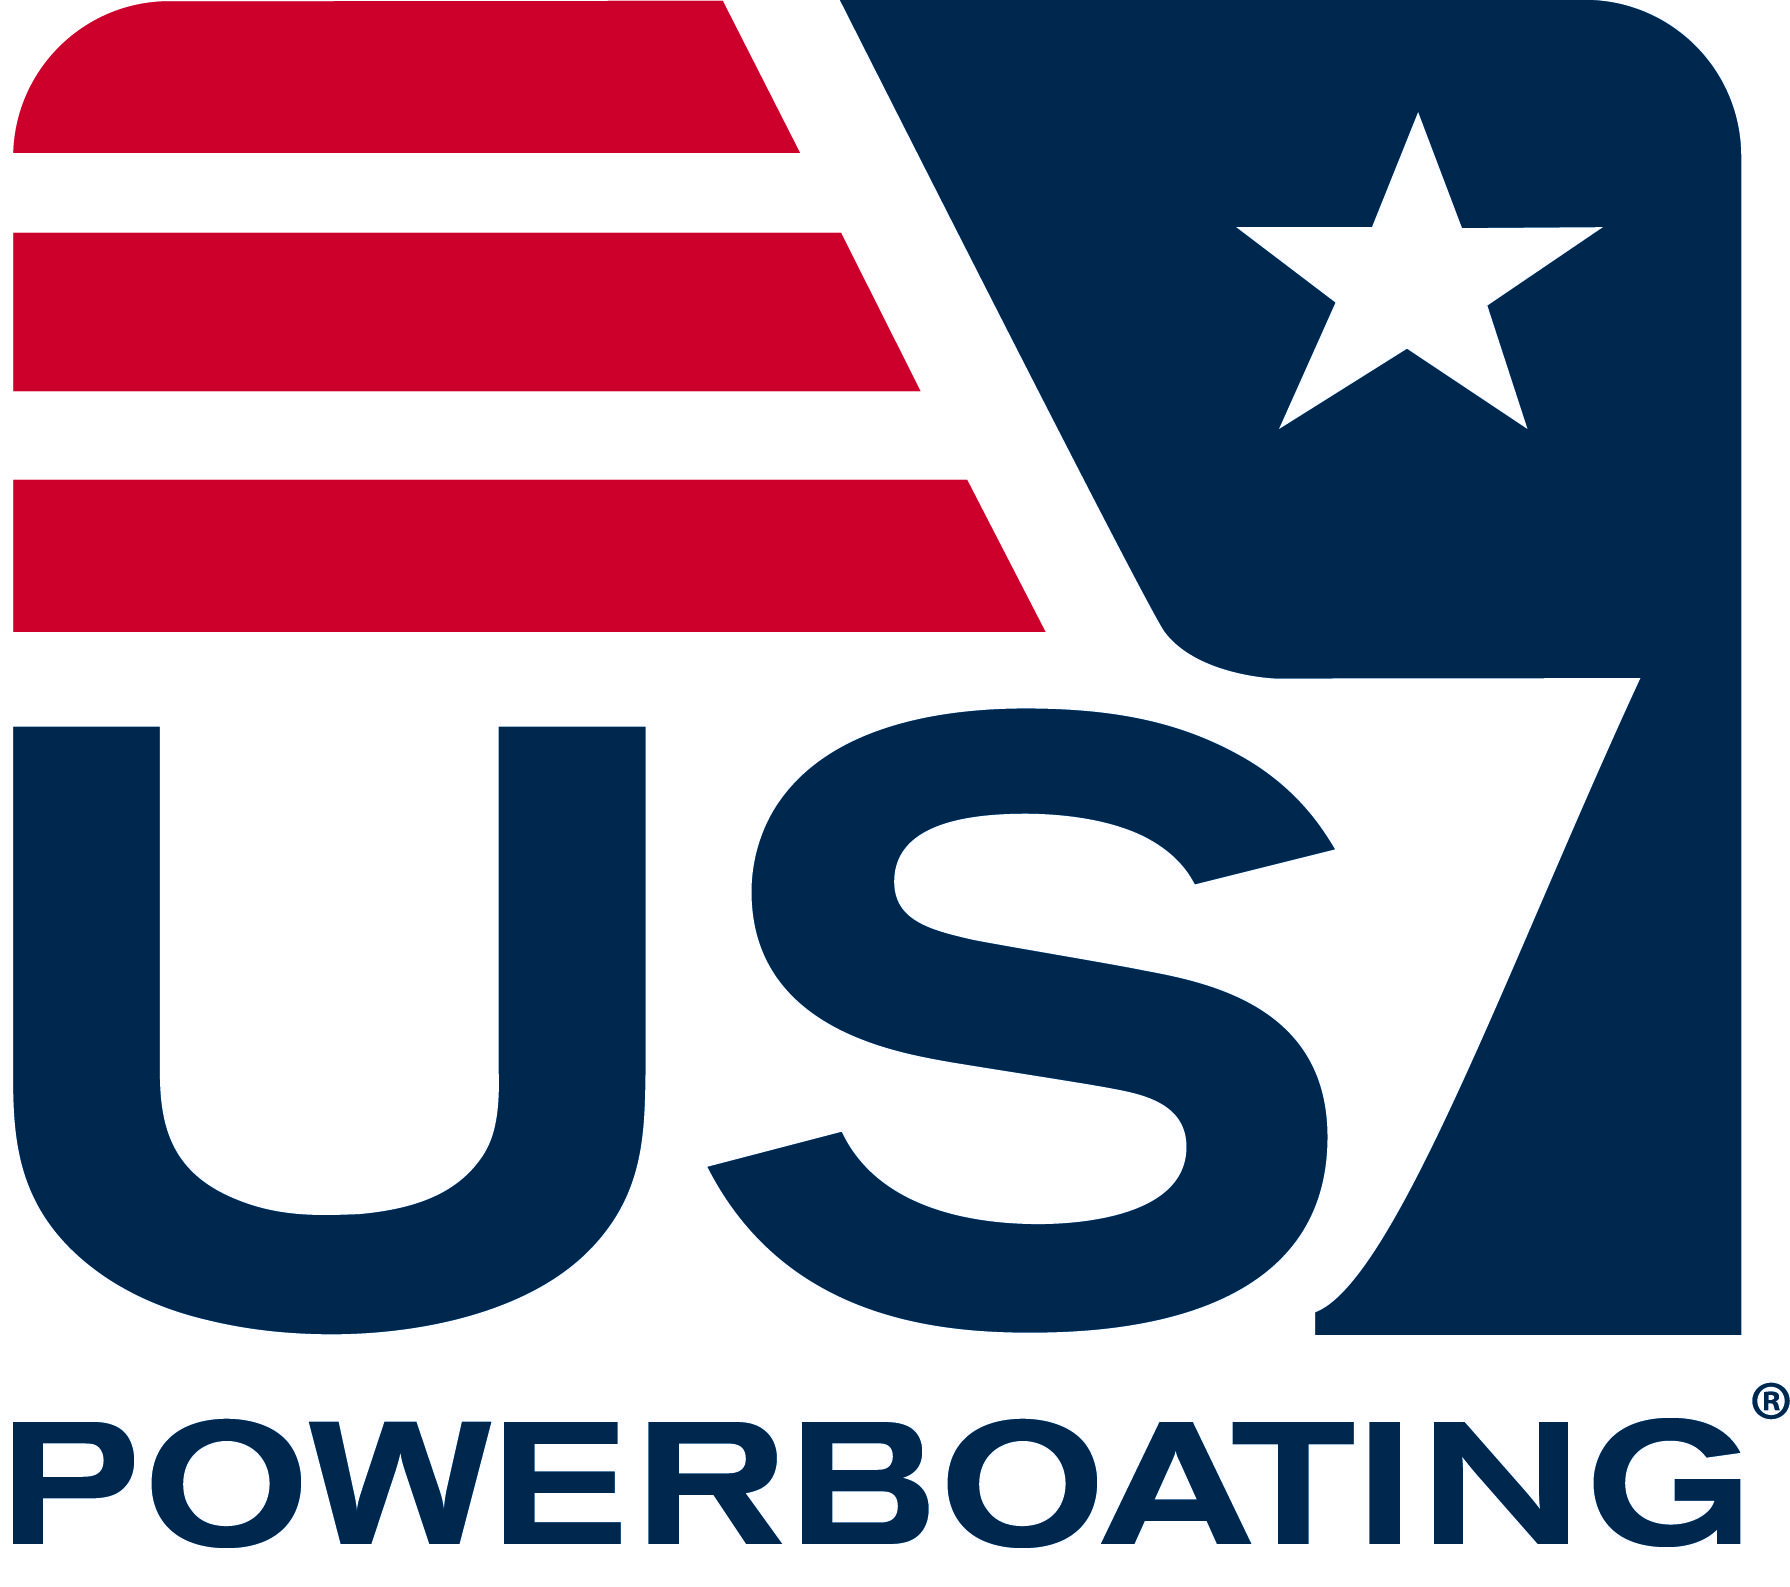 powerboat training course